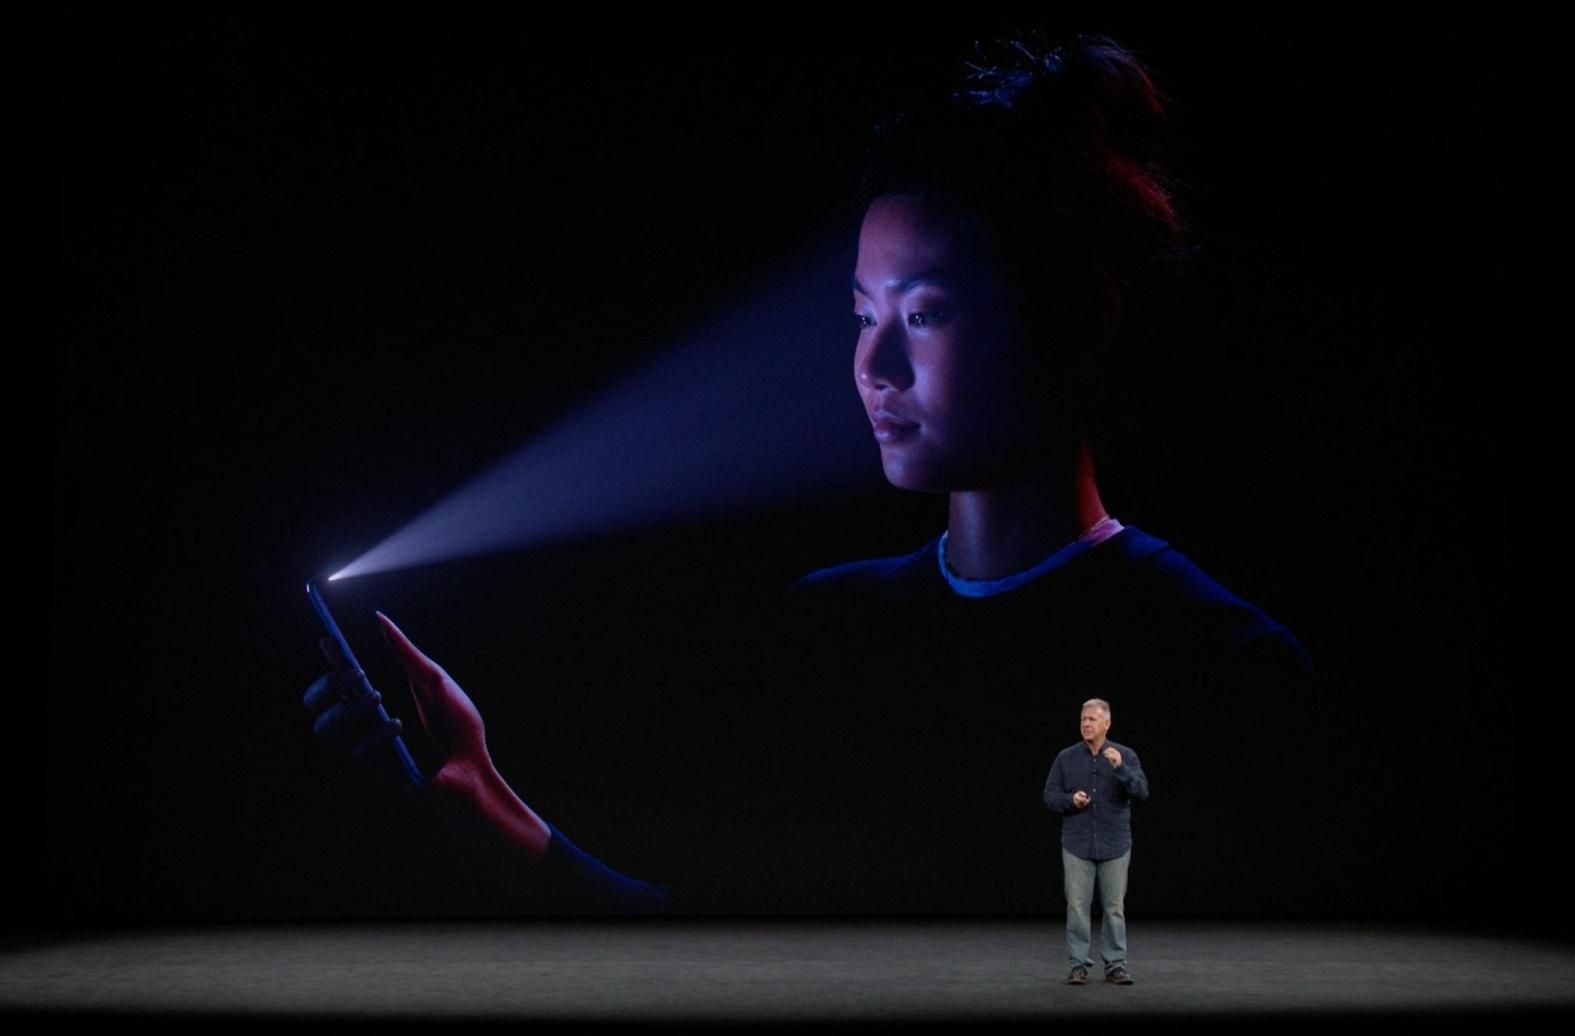 face id dystopia